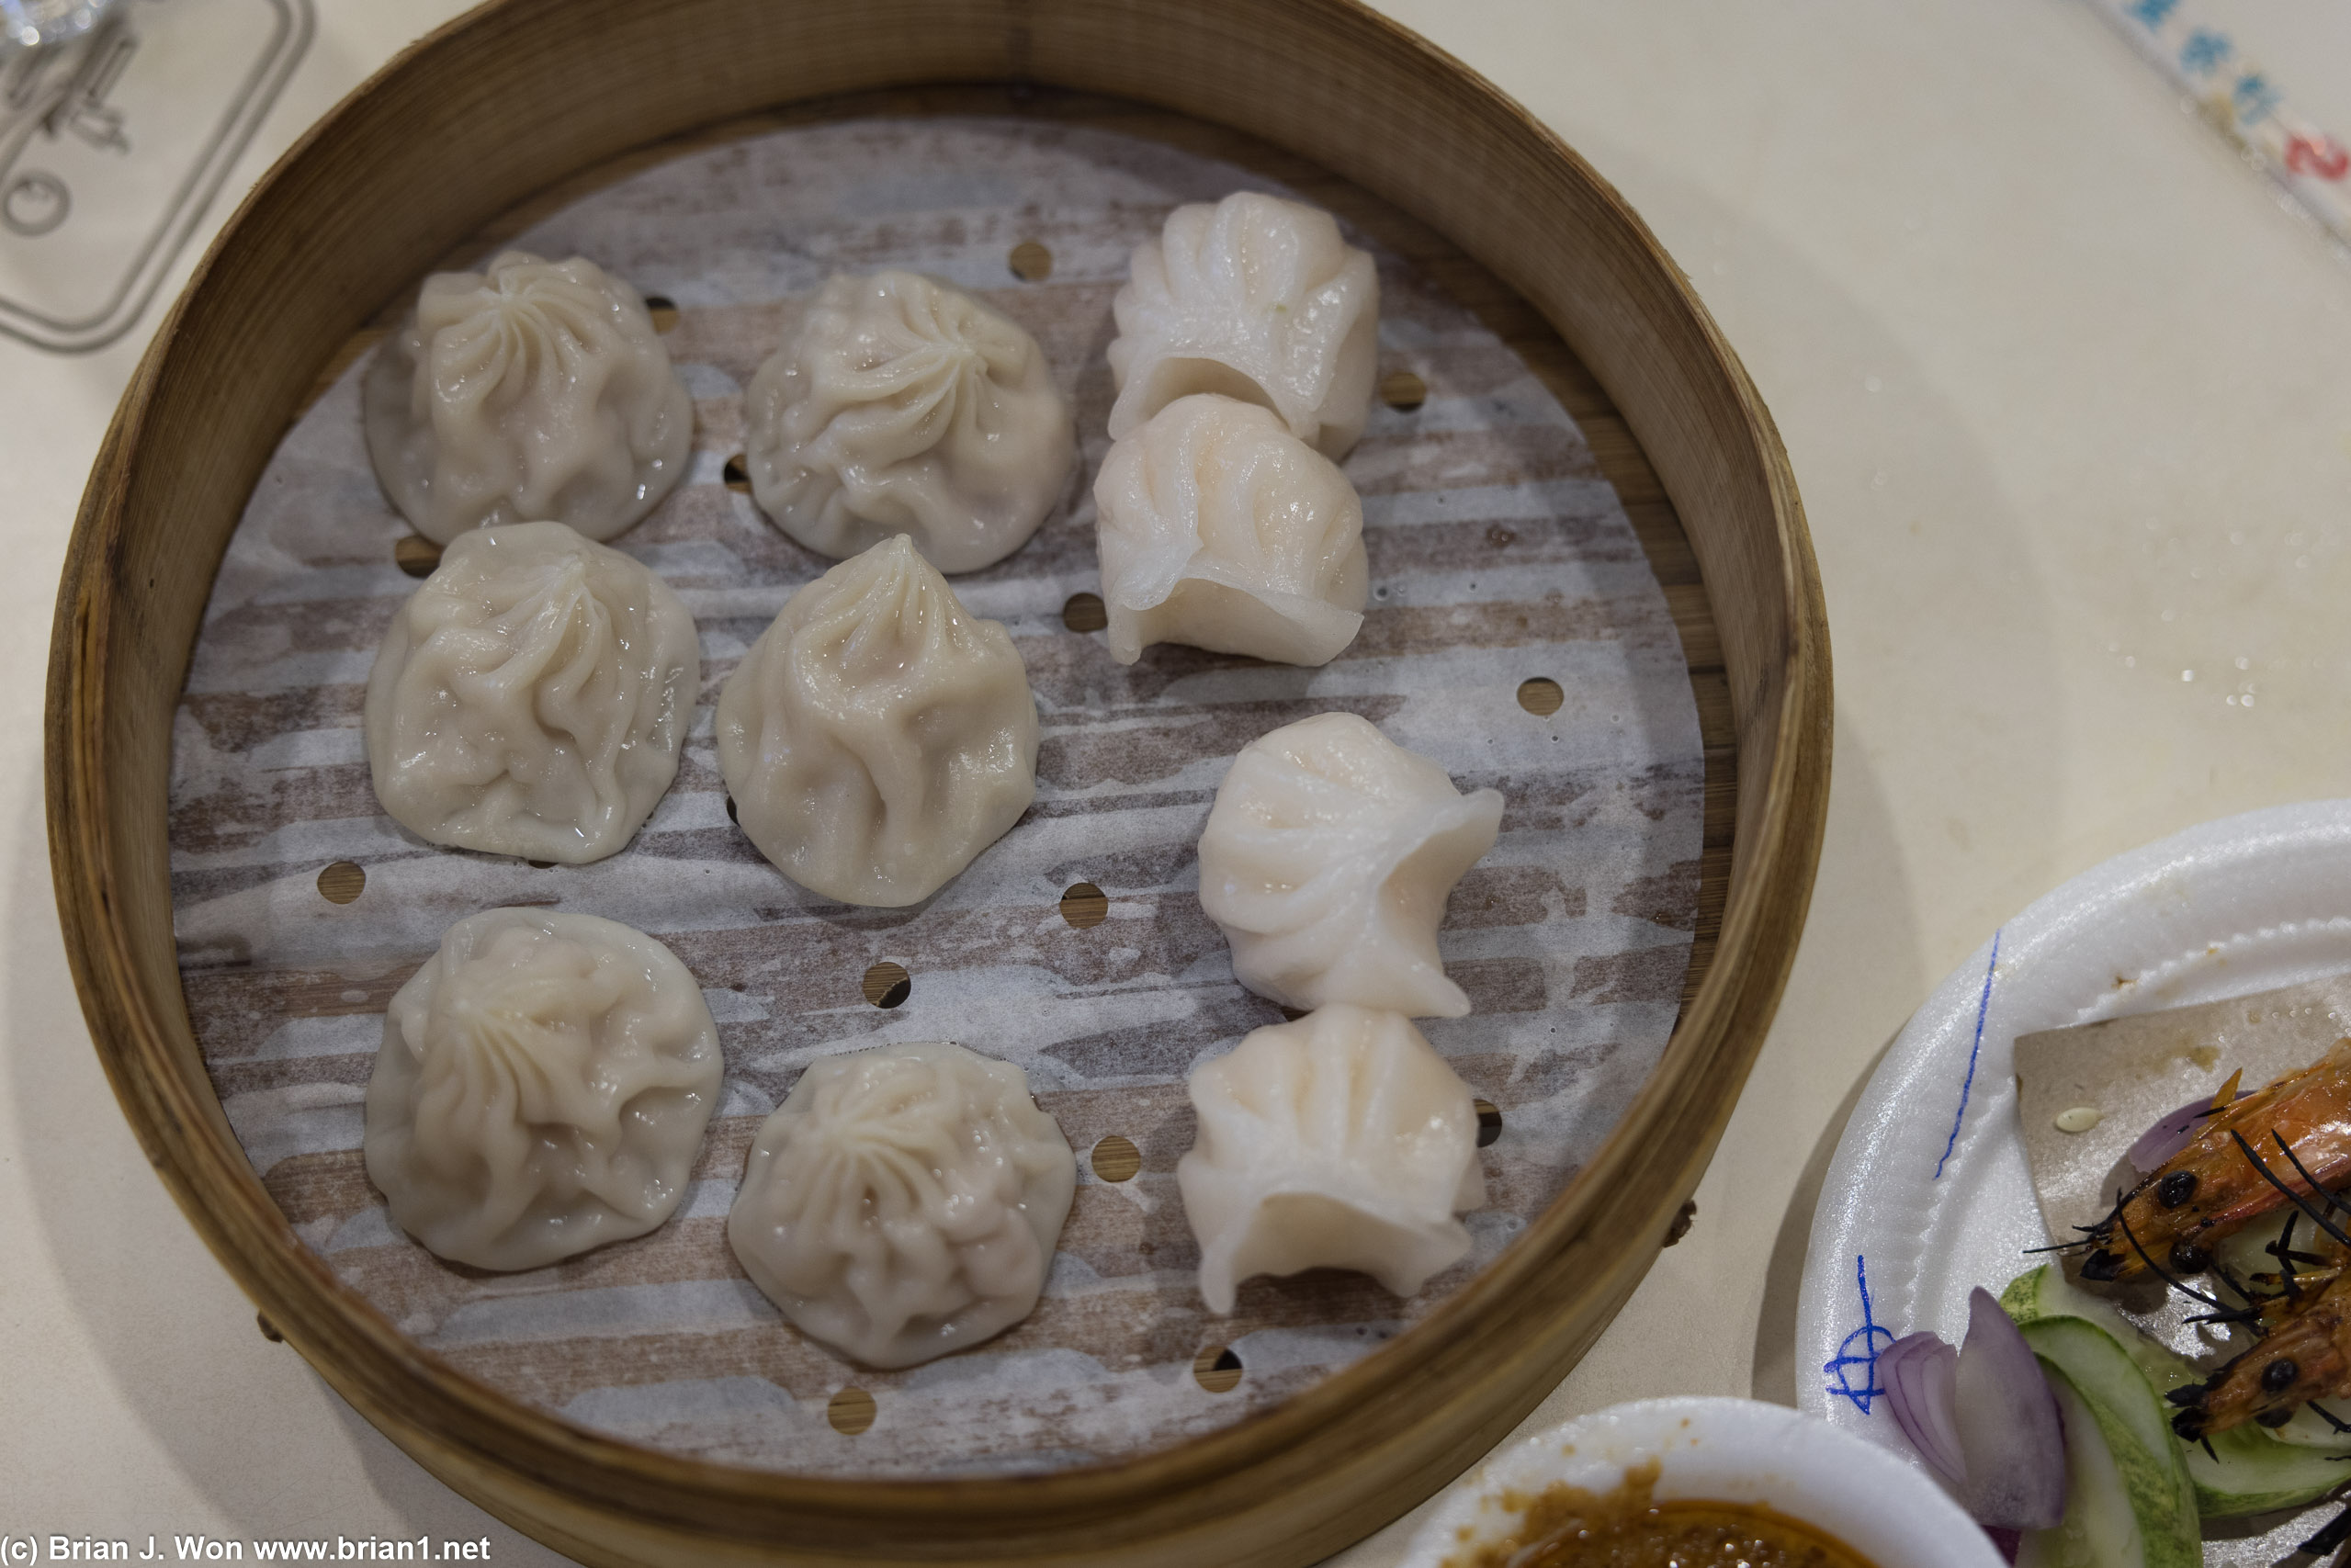 For hawker stall xiao long bao and har gow, these weren't bad.